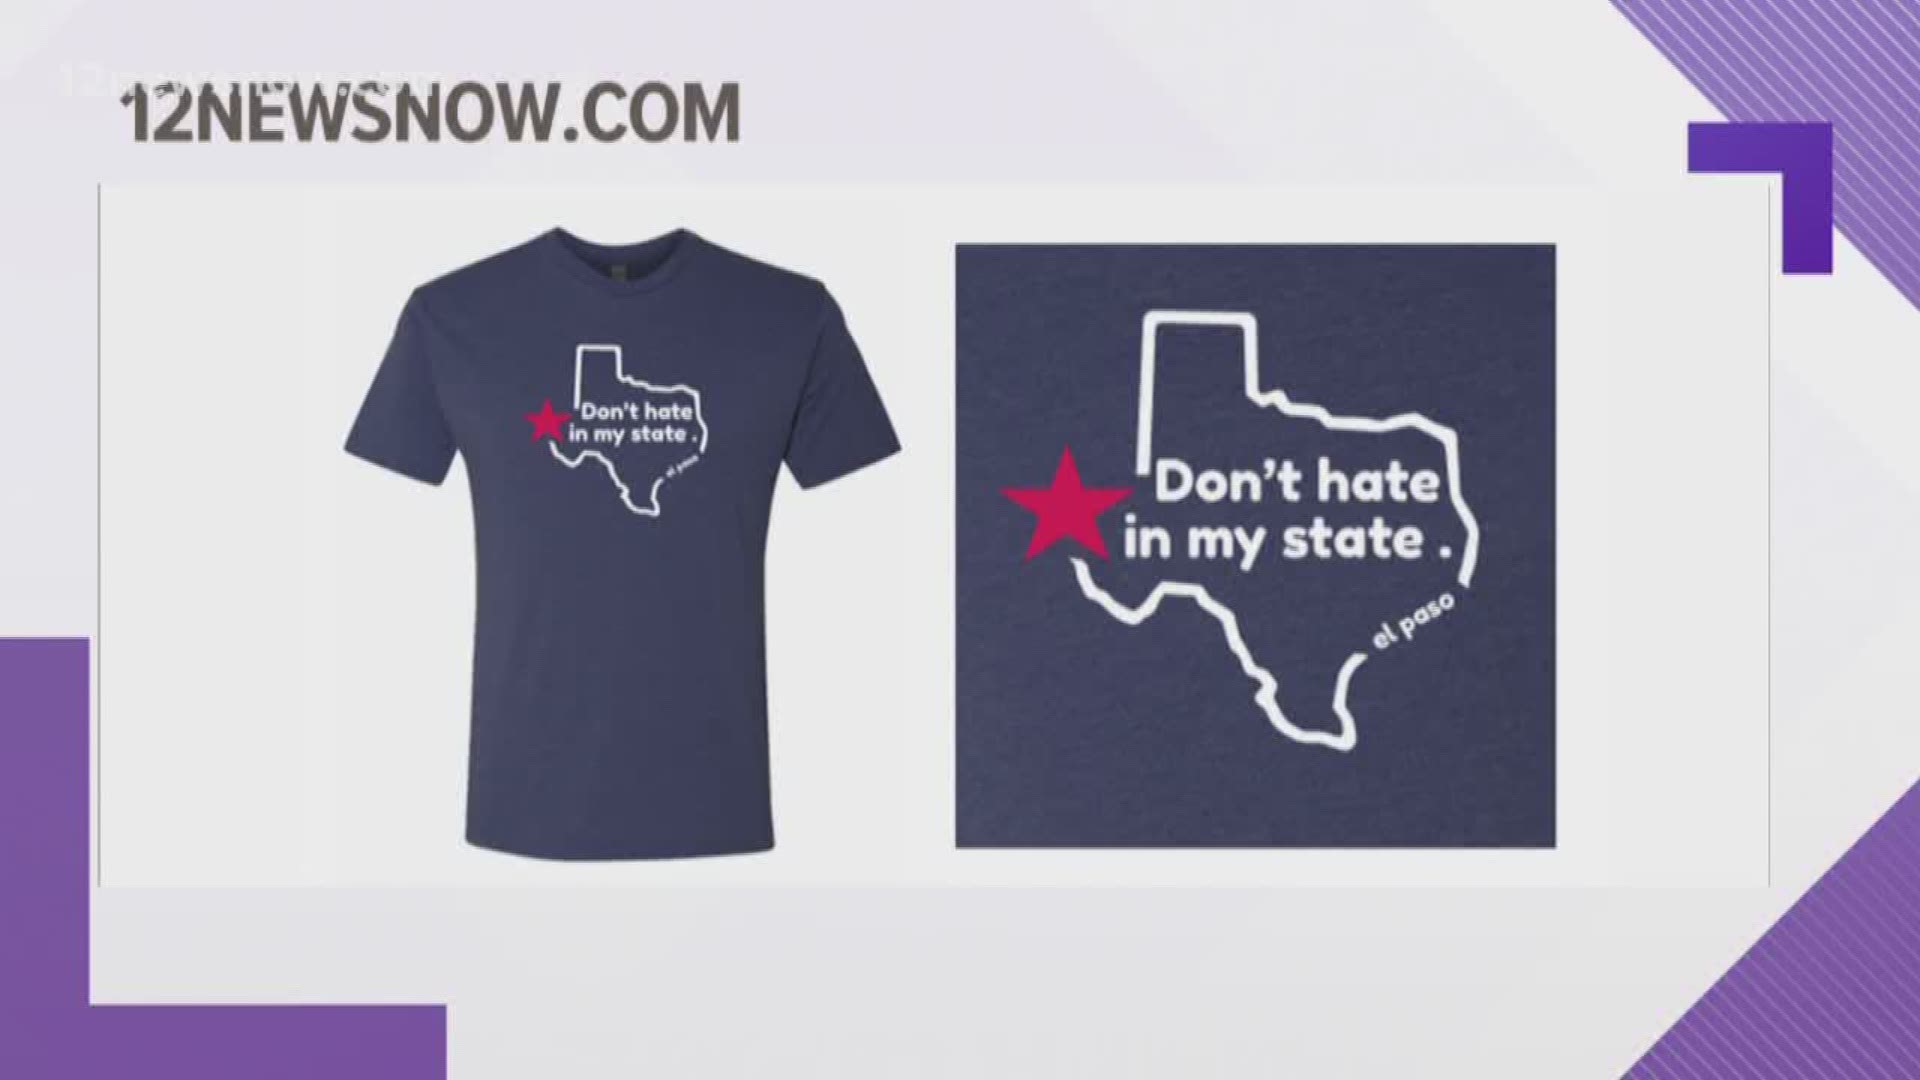 It's been a tough week for our state as we cope with the tragic killings in El Paso. 12News is joining fellow Tegna stations across Texas to raise money for the victims. When you buy this "Don't Hate in My State" t-shirt, 100 percent of the proceeds will go to the El Paso Victims Relief Fund.